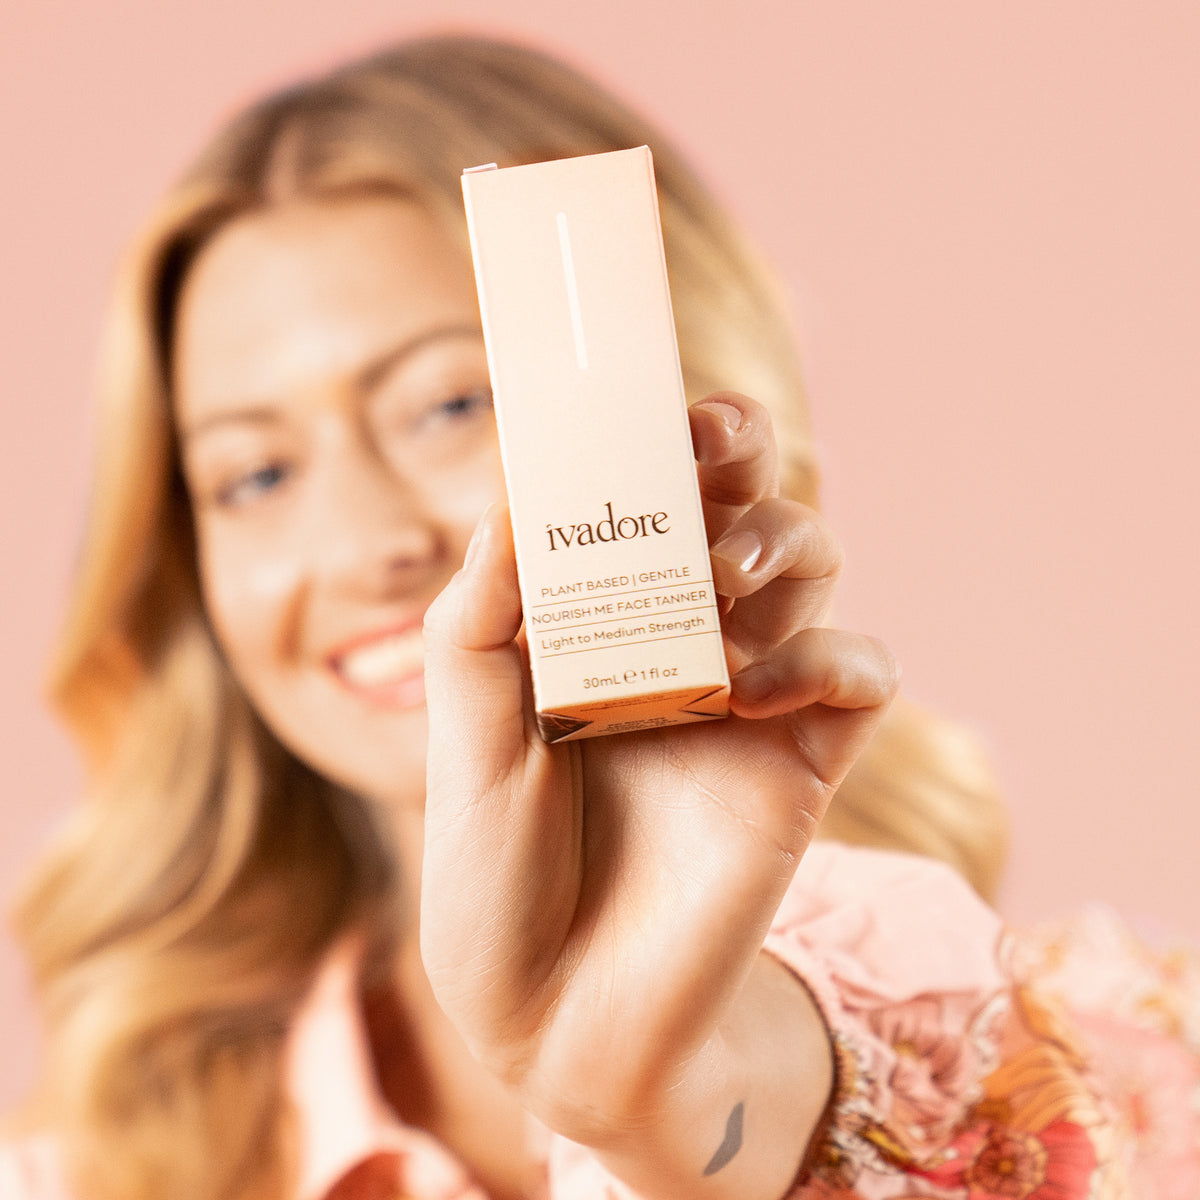 Smiling woman with blonde wavy hair holding Ivadore face tan box  to camera